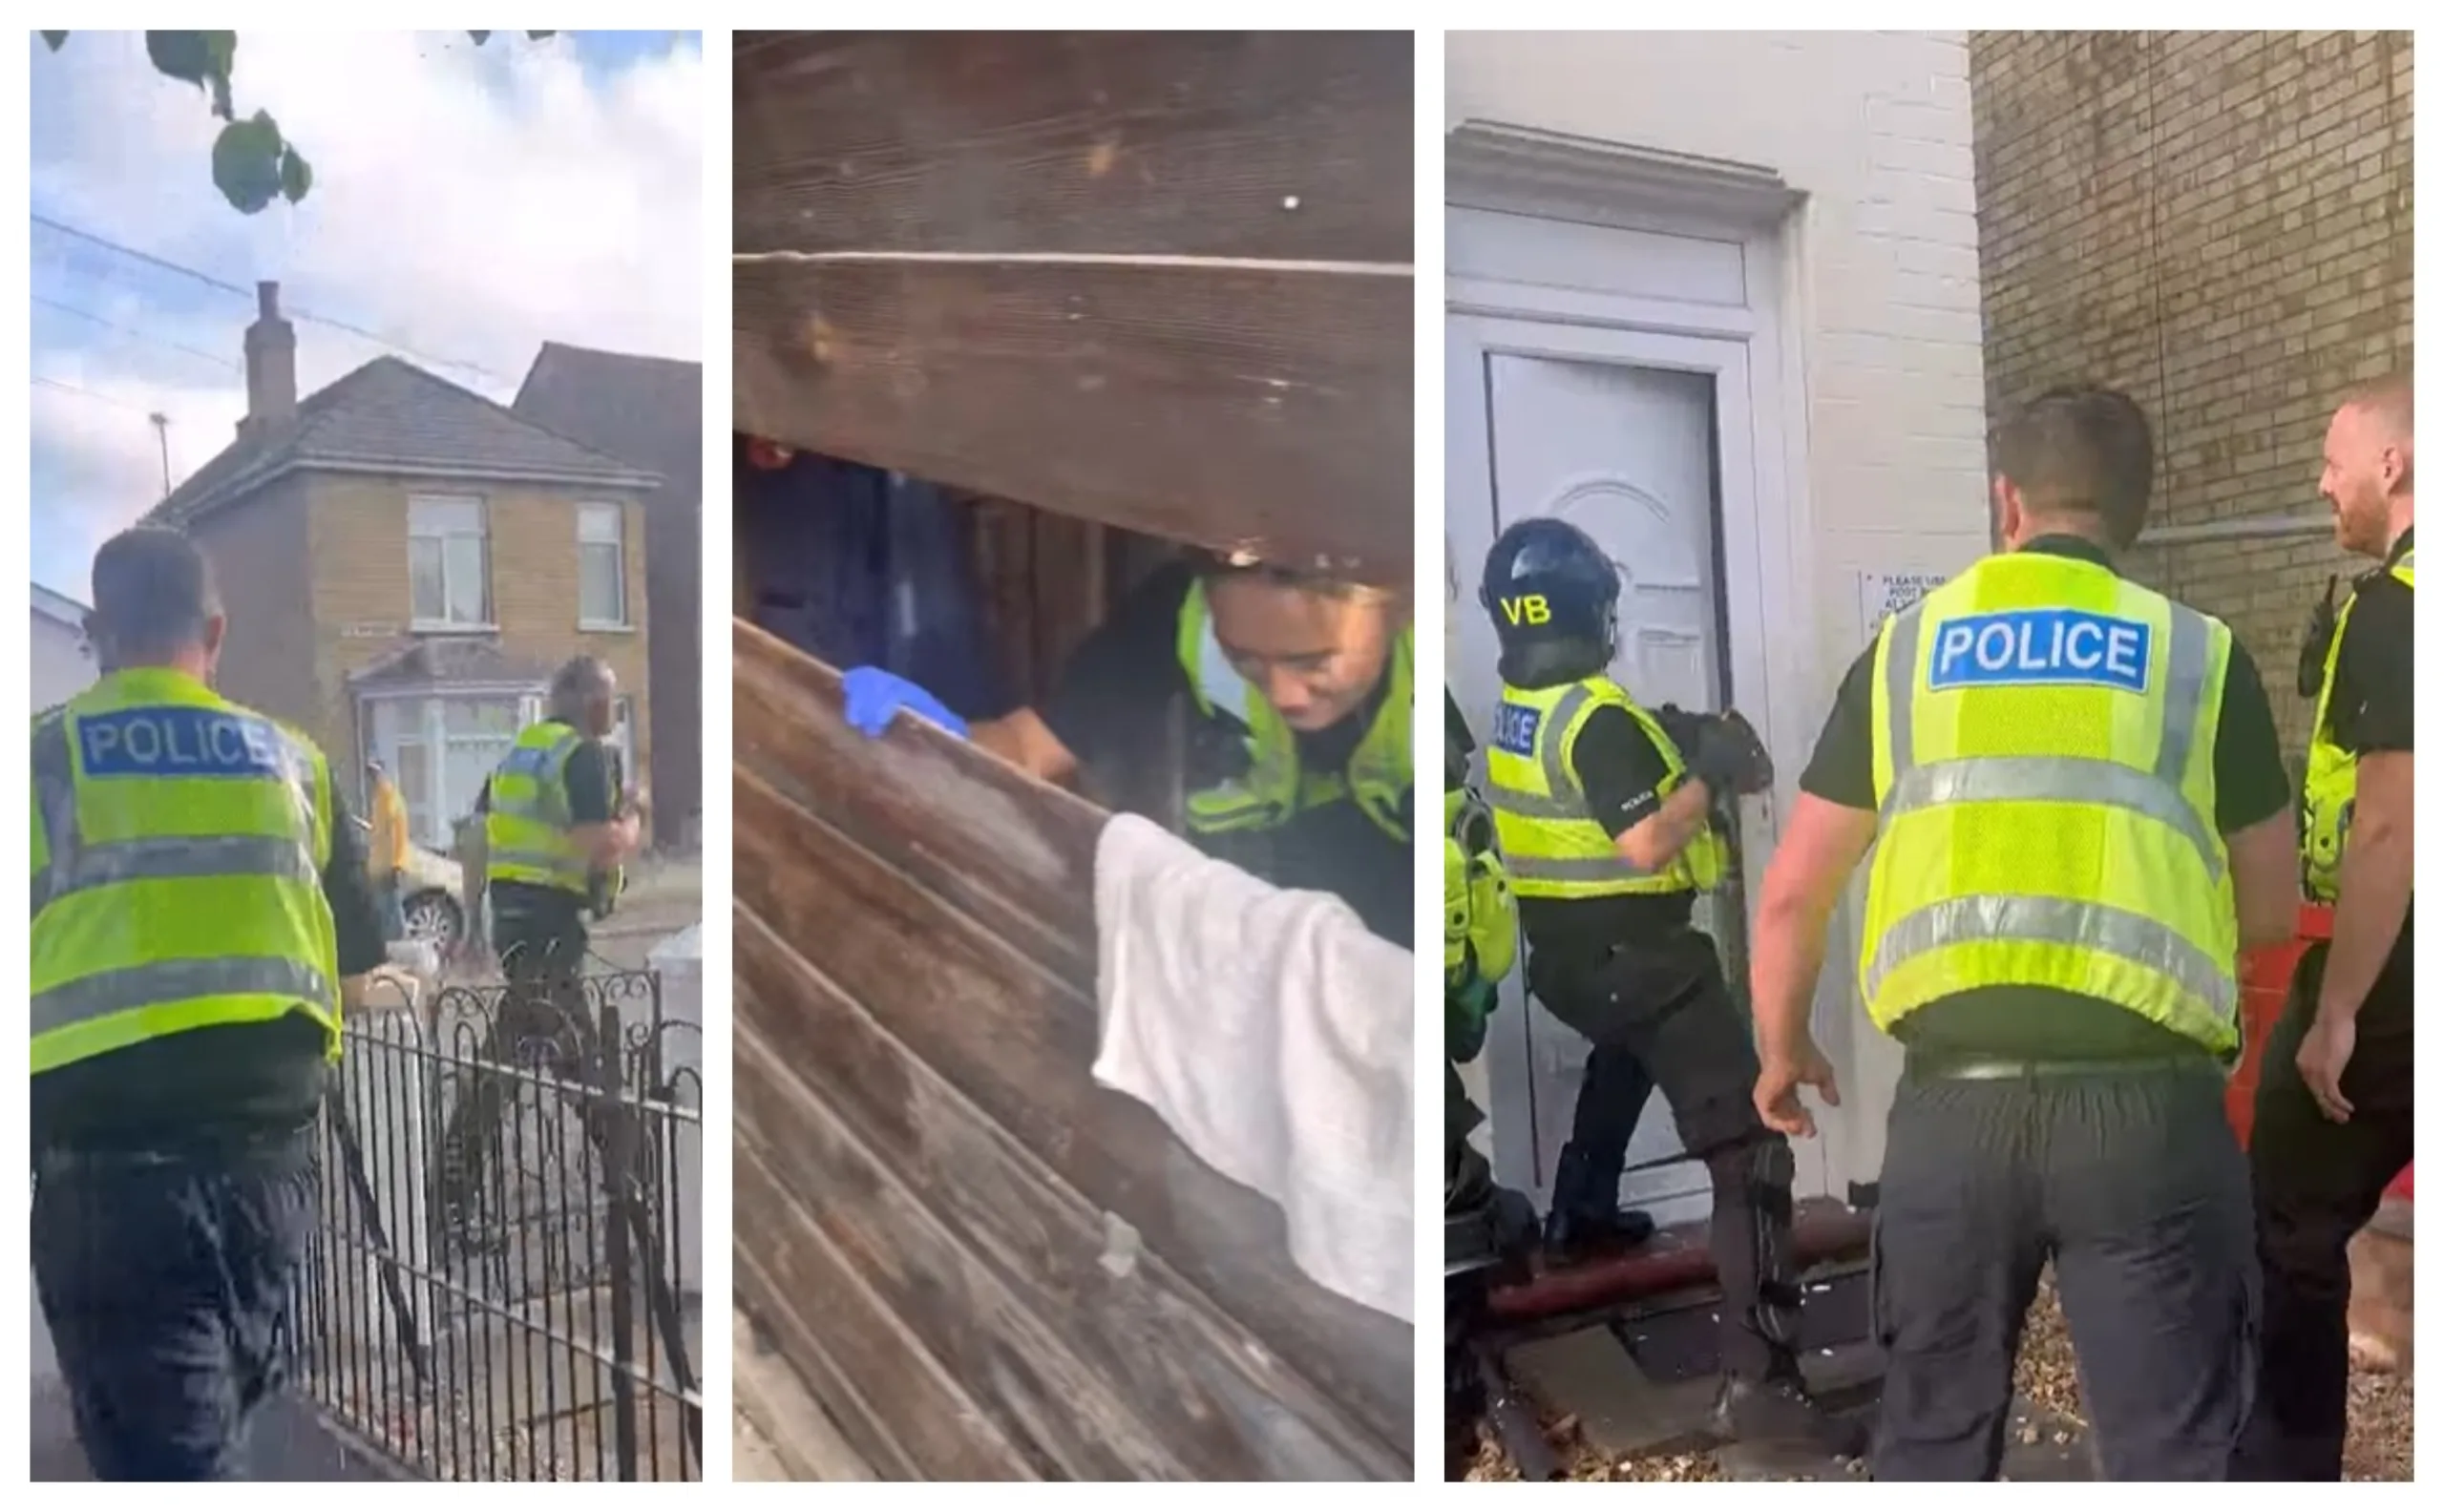 Extracts from video made by Cambridgeshire police of drugs raid in March, Cambs.